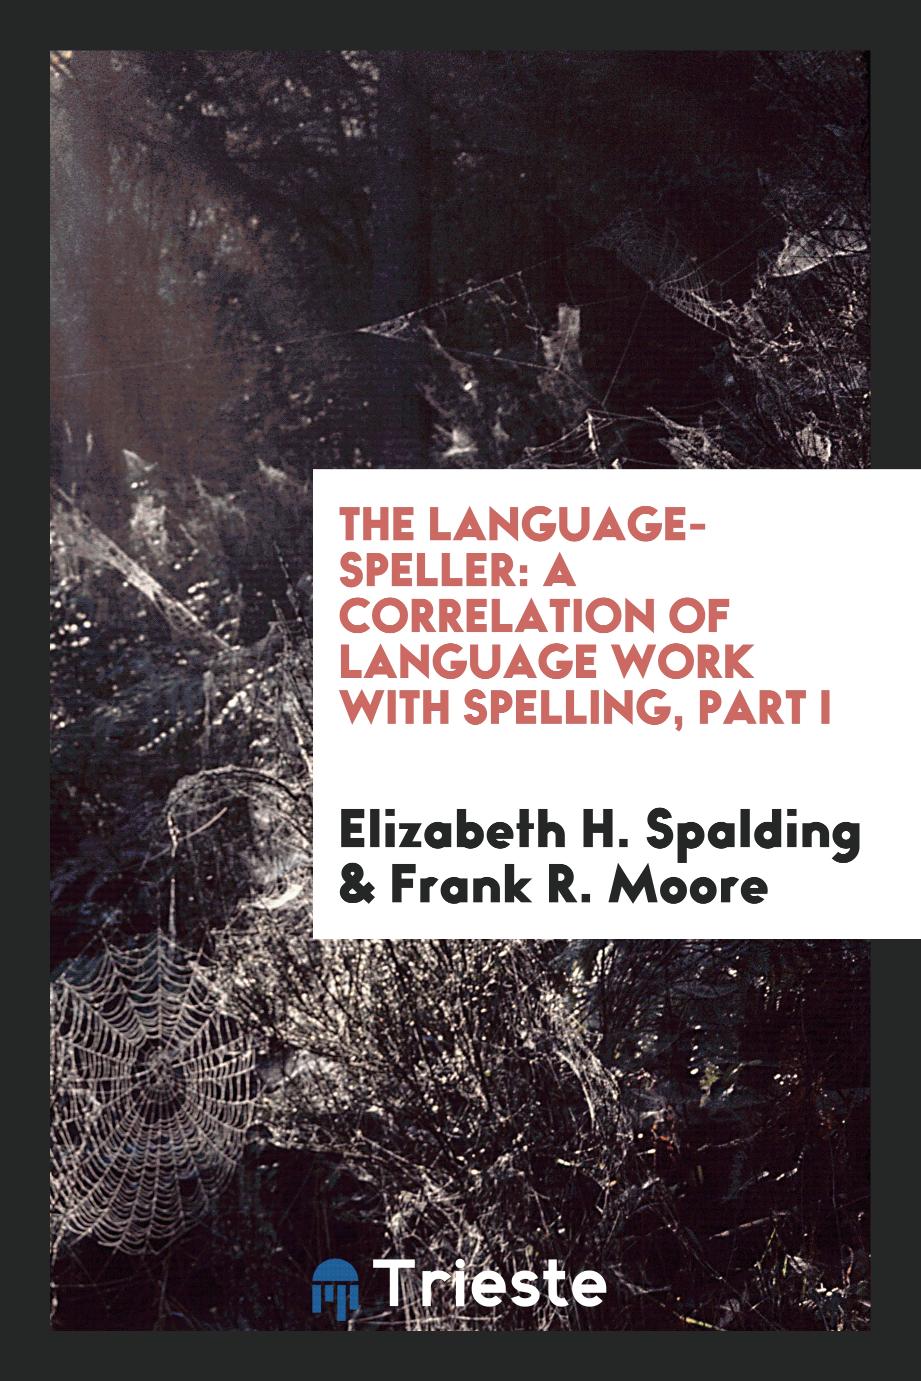 The Language-Speller: A Correlation of Language Work with Spelling, Part I